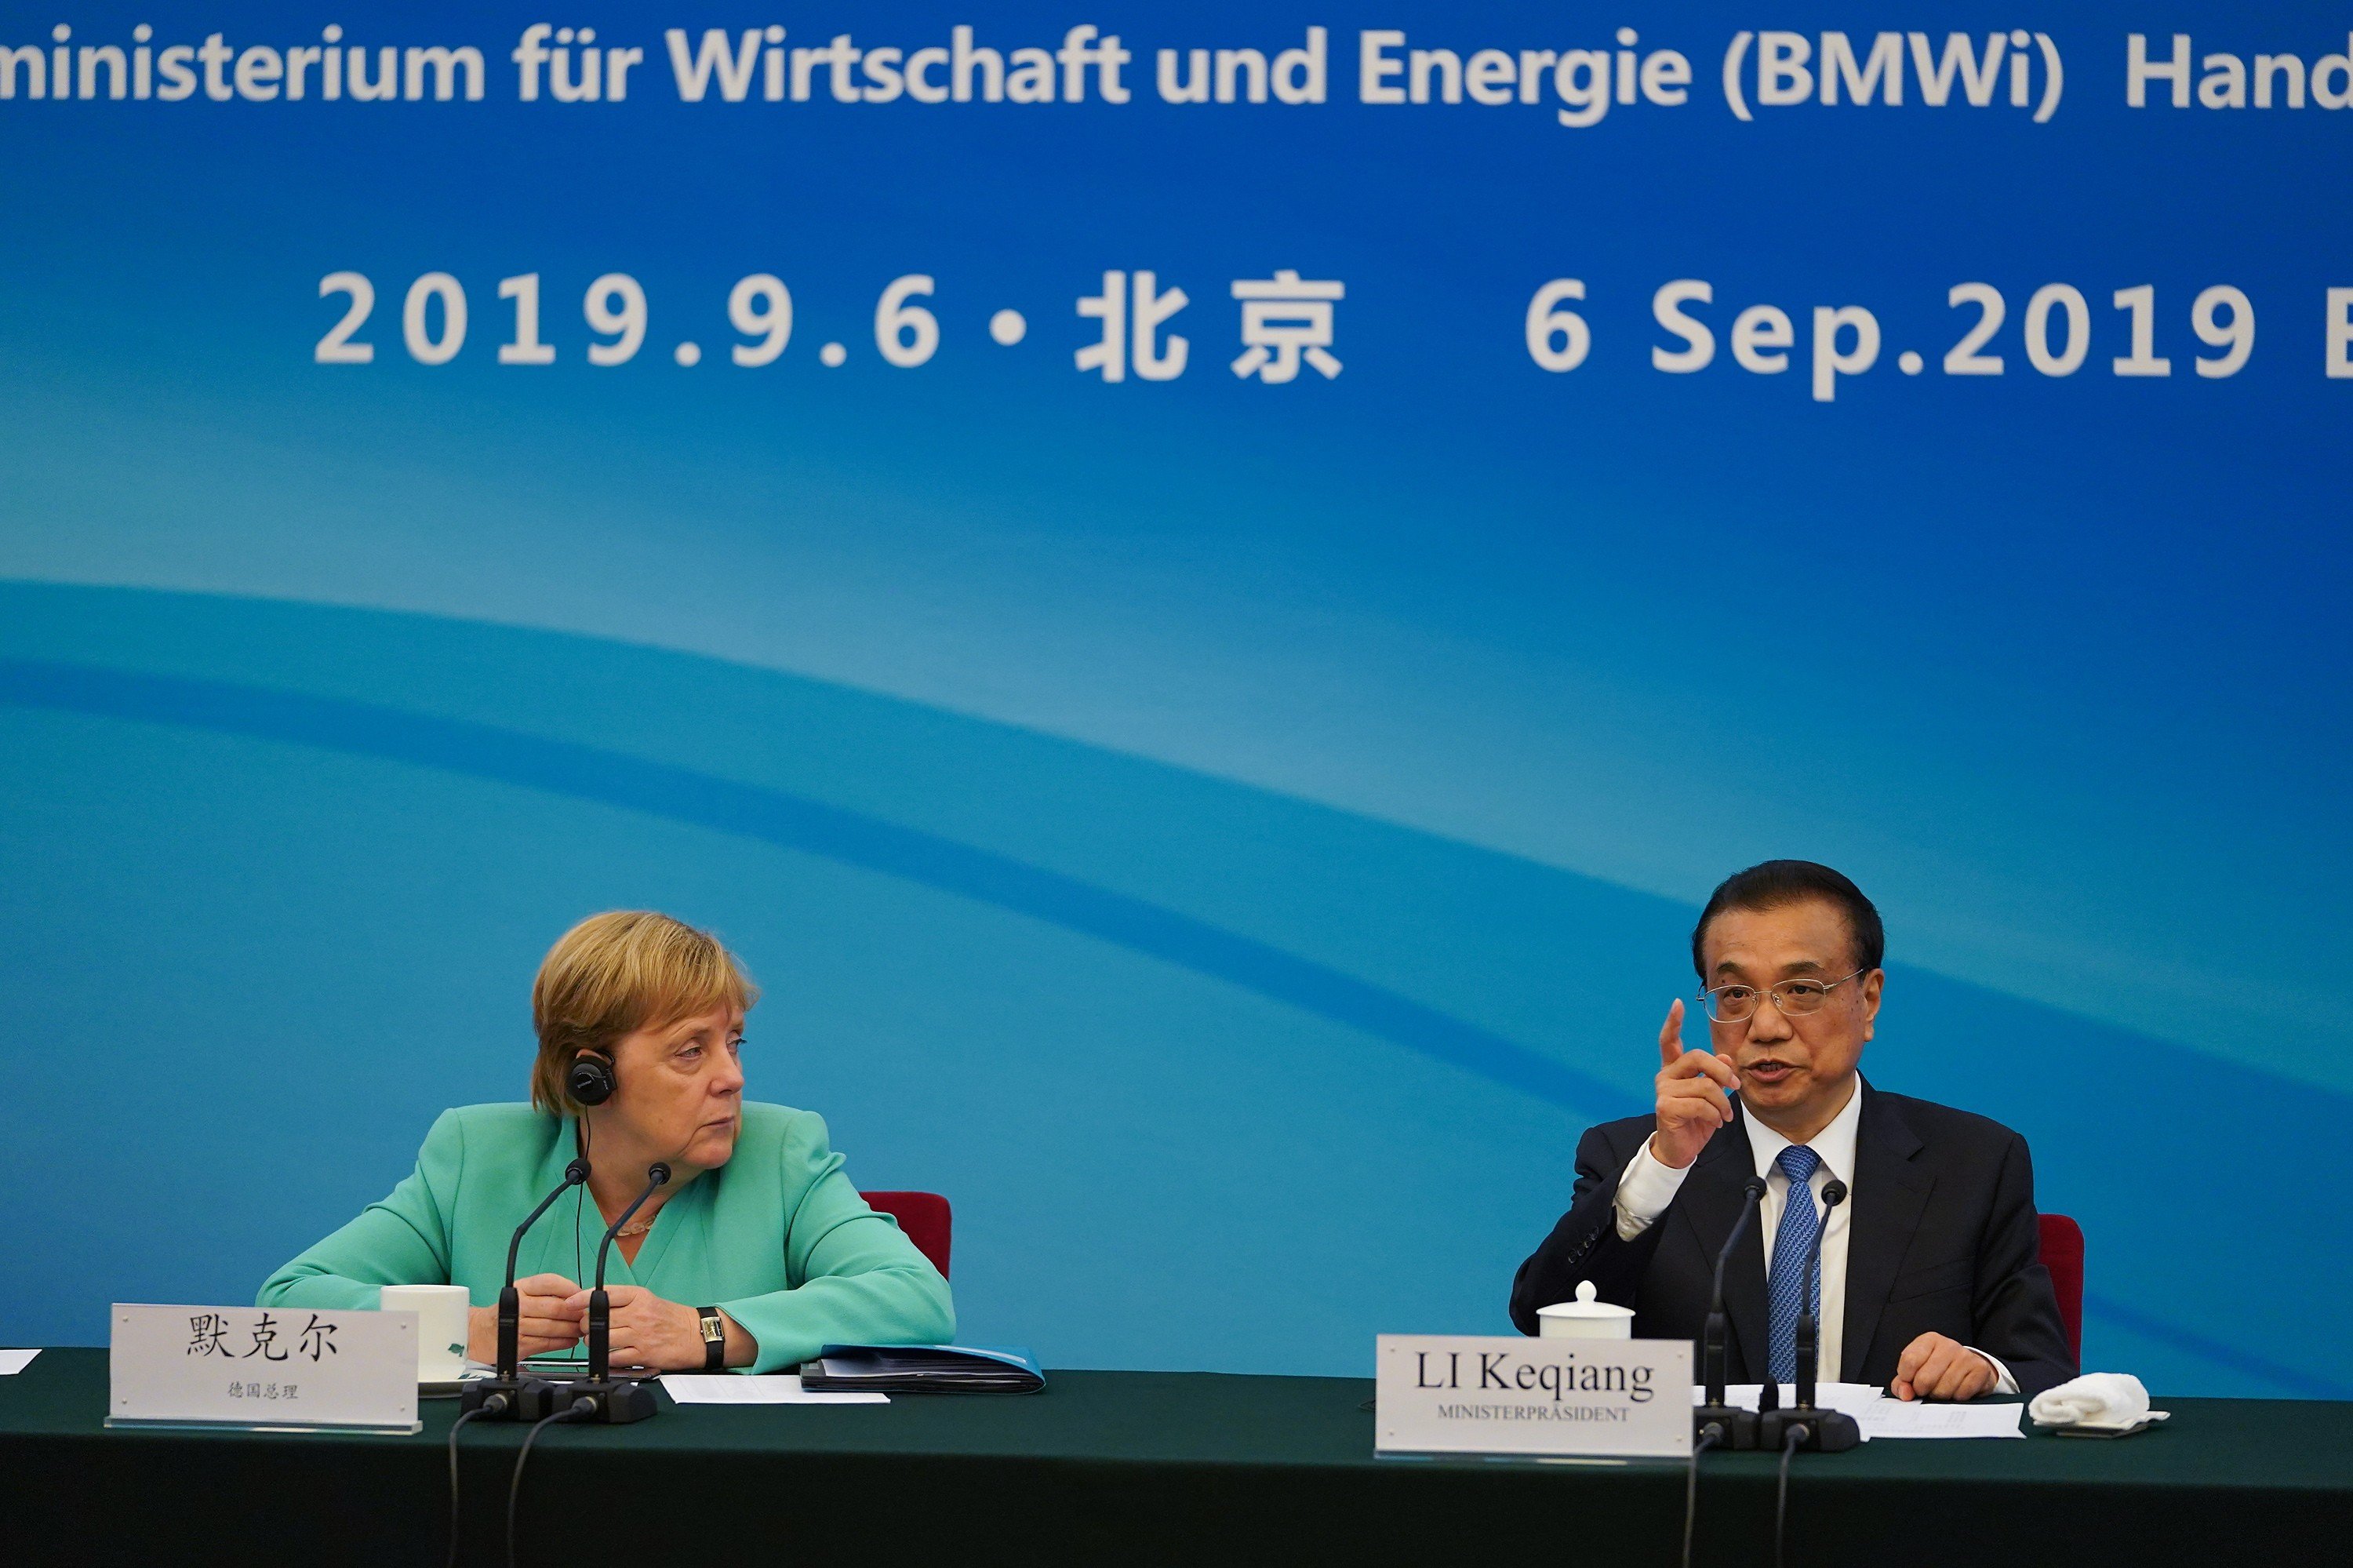 German Chancellor Angela Merkel and Chinese Premier Li Keqiang talk during a session about economic relations in Beijing, on September 6. Merkel’s comments on Hong Kong and Li’s response added to EU-China tension as both sides work on an investment agreement ahead of a possible recession. Photo: EPA-EFE